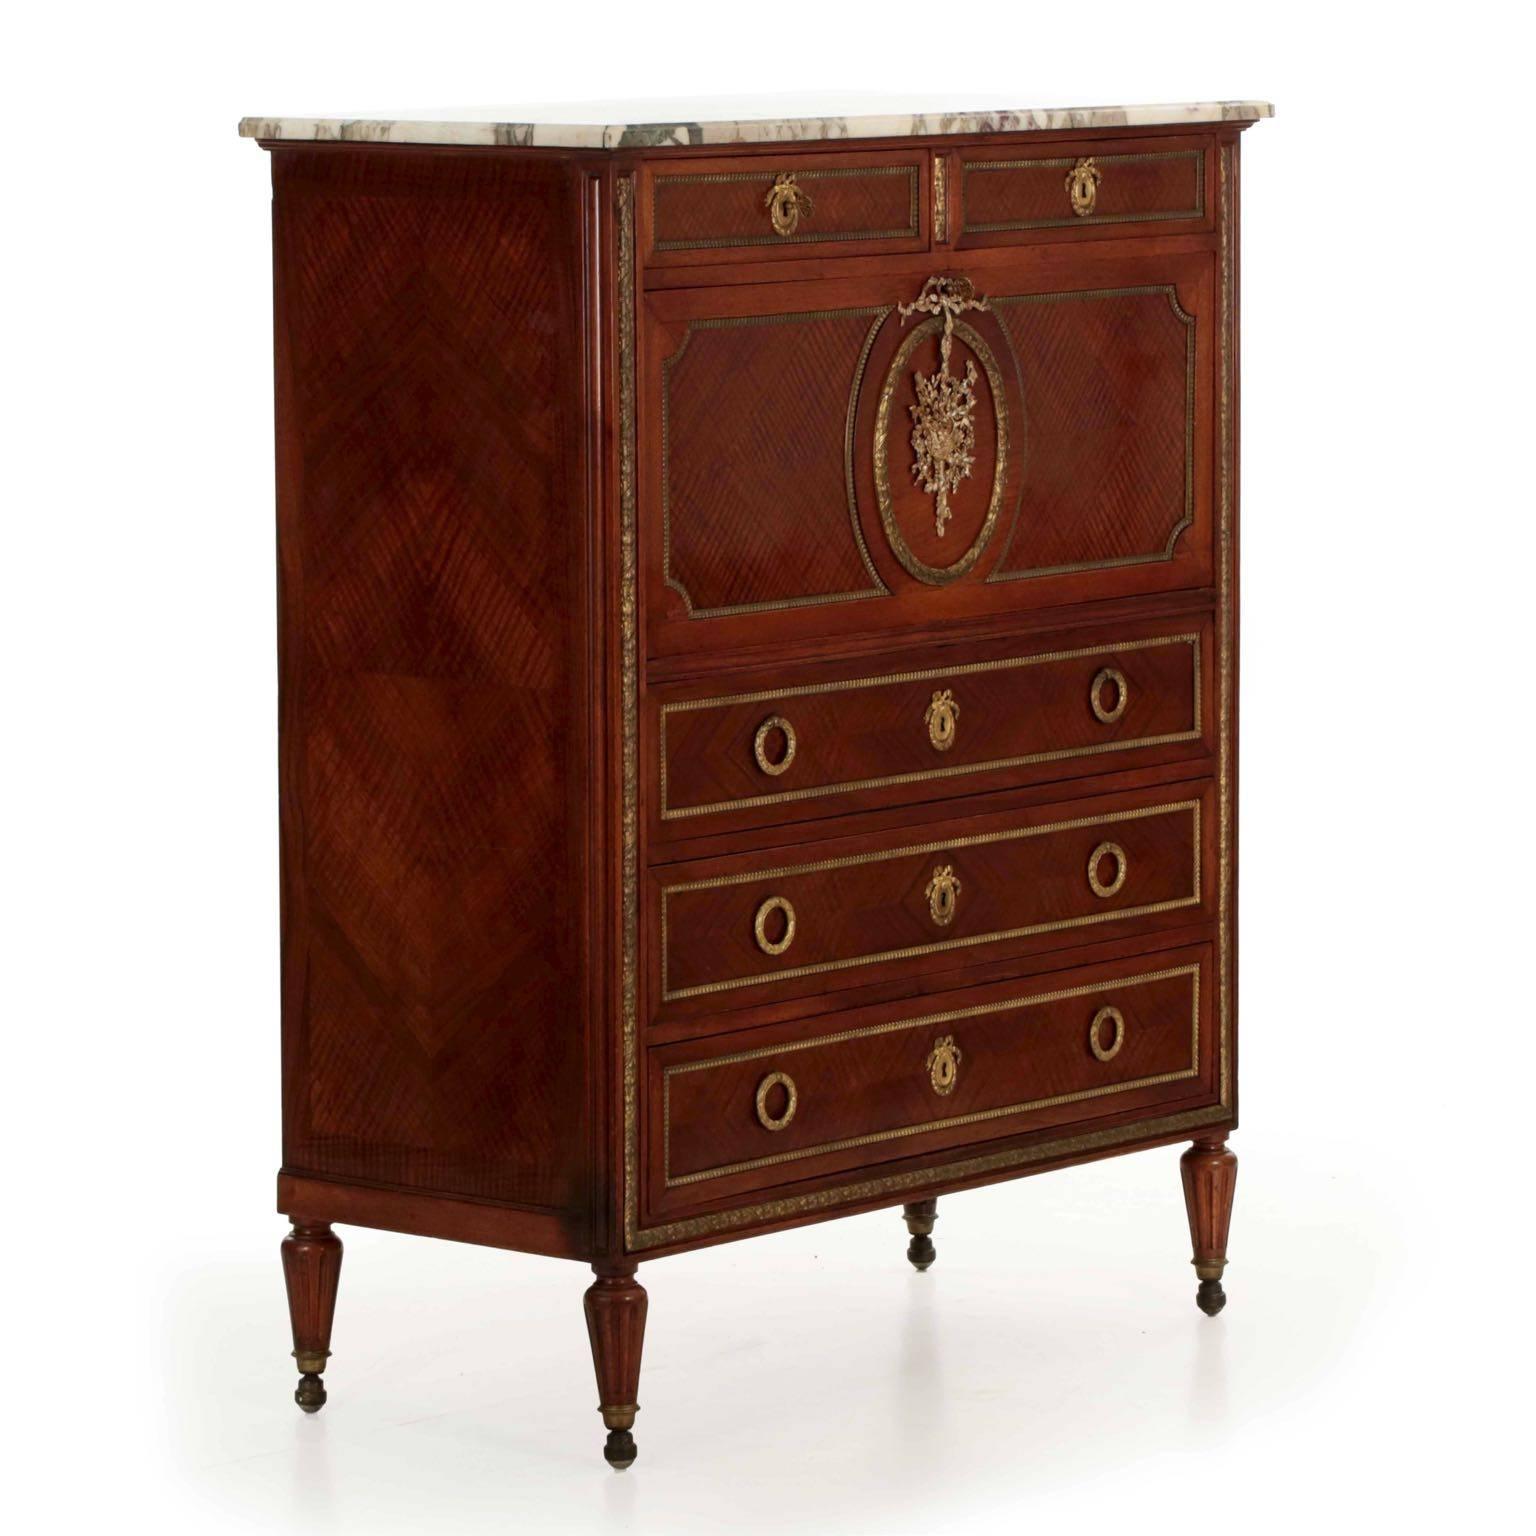 A fine French fall-front secretary desk from the first quarter of the 20th century, this piece was executed by the shop of Maison Forest in Paris and exhibits all of the careful attention to detail found in his work. The vibrant kingwood veneers are